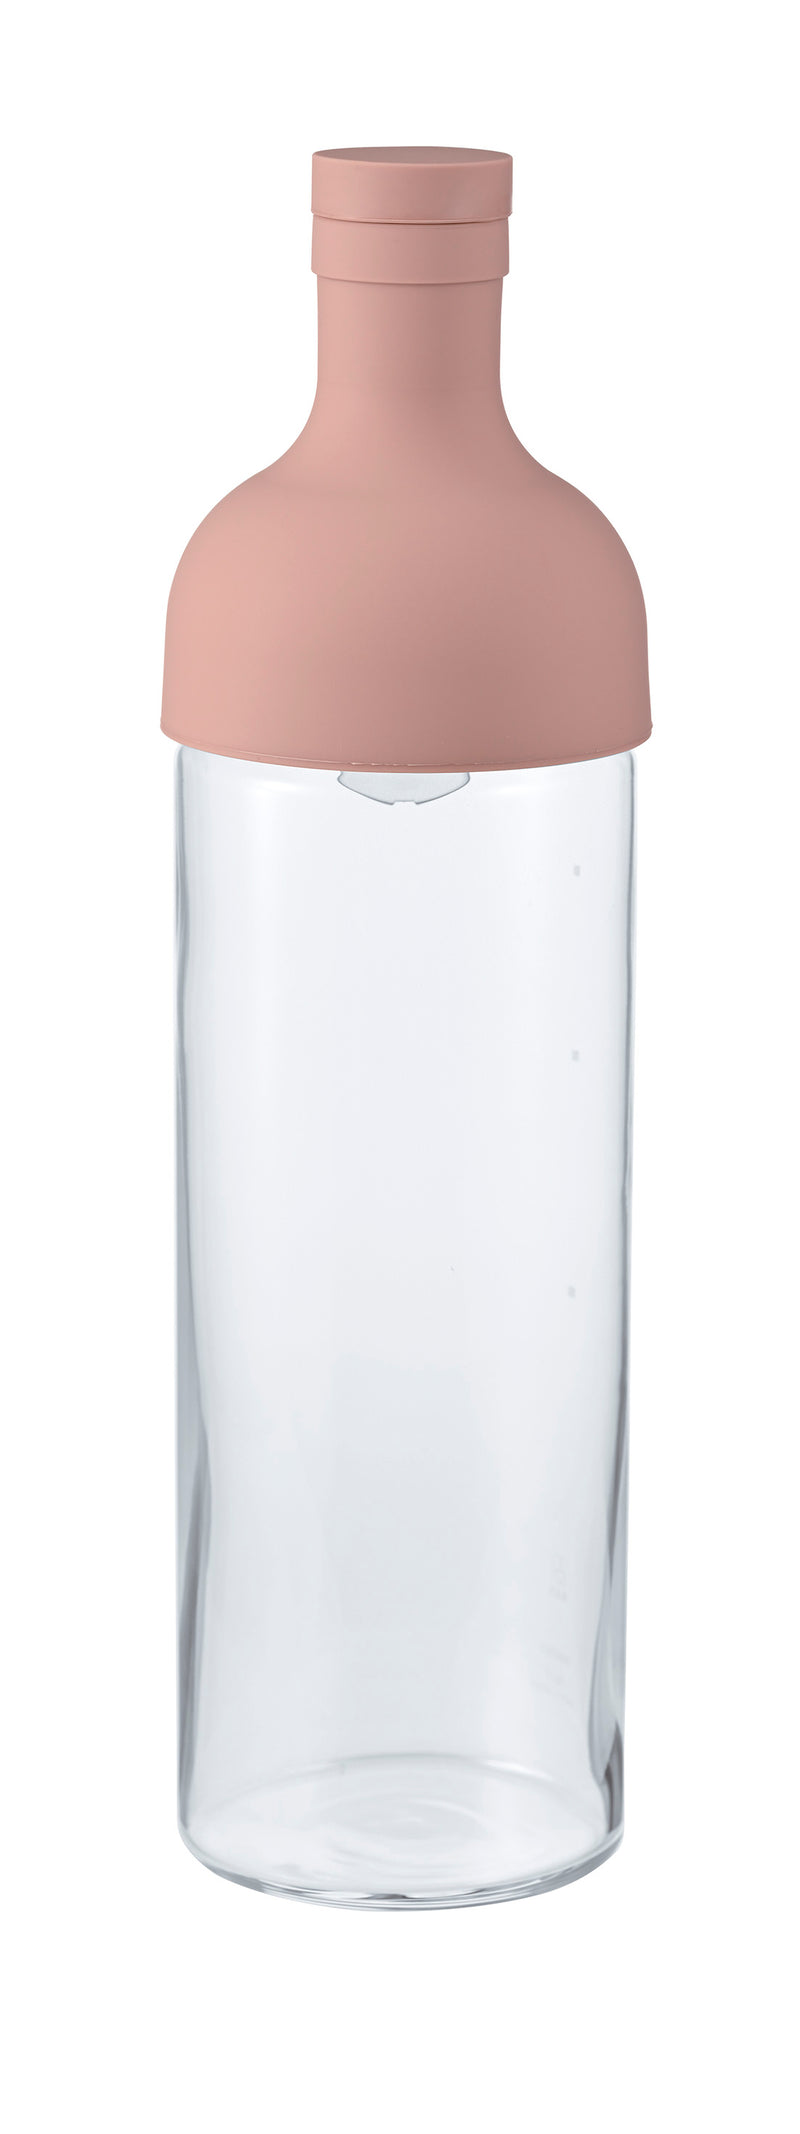 HARIO Cold Brew Tea Filter-in Bottle, 750ml - SMOKY PINK, EdoMatcha